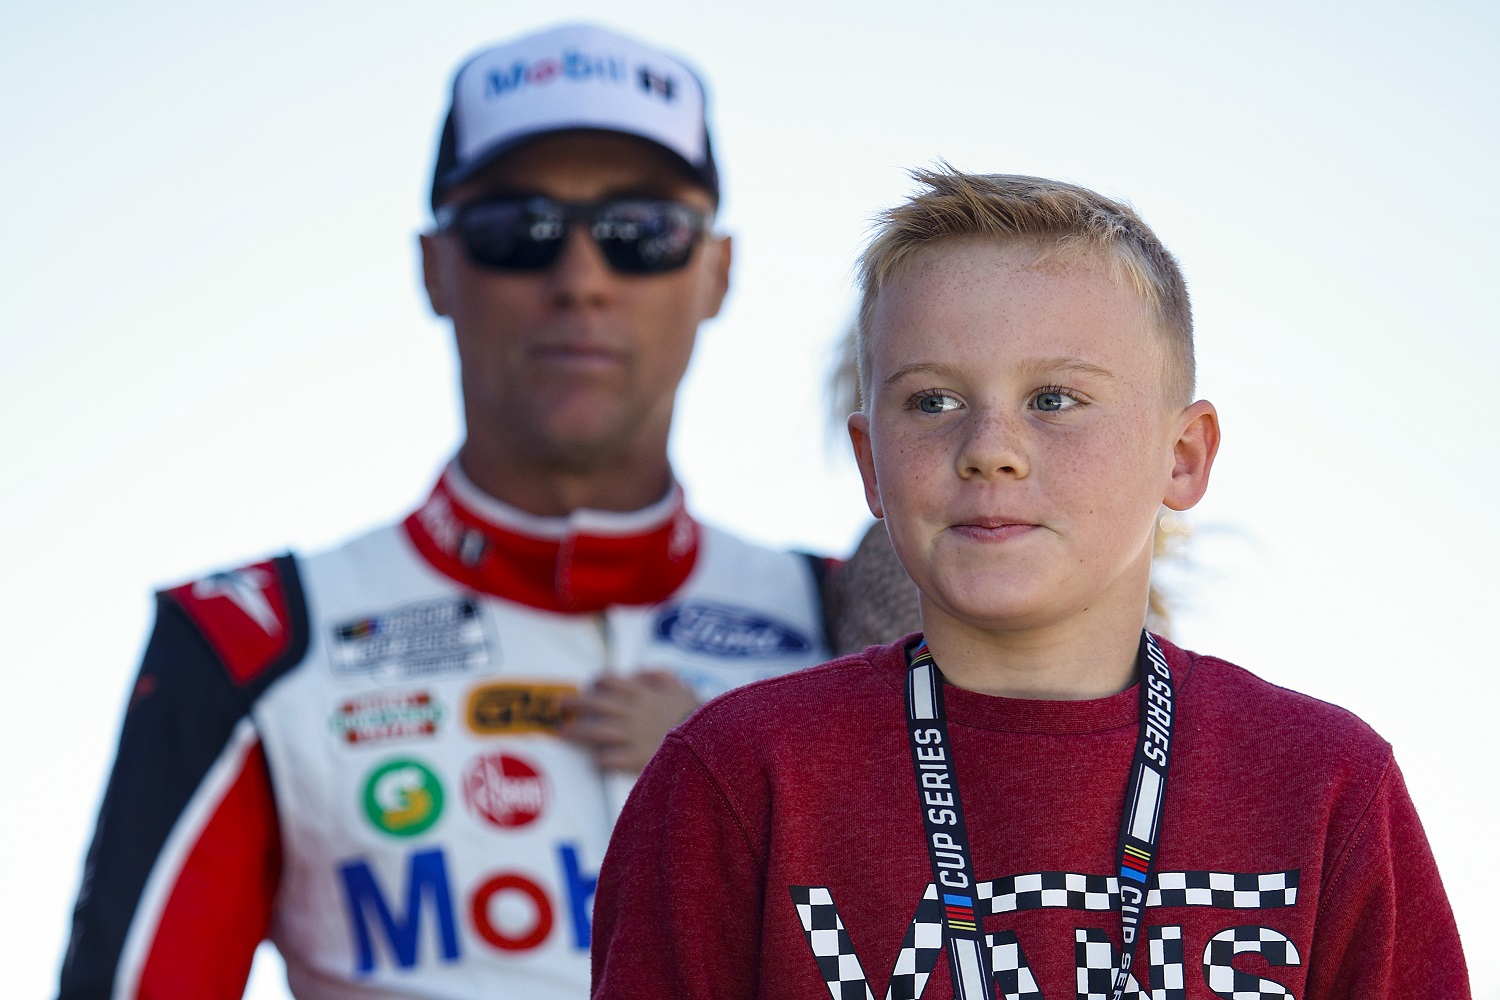 Keelan Harvick, the son of NASCAR Cup Series driver Kevin Harvick, walks onstage during driver intros prior to  the Folds of Honor QuikTrip 500 at Atlanta Motor Speedway on March 20, 2022. | Sean Gardner/Getty Images